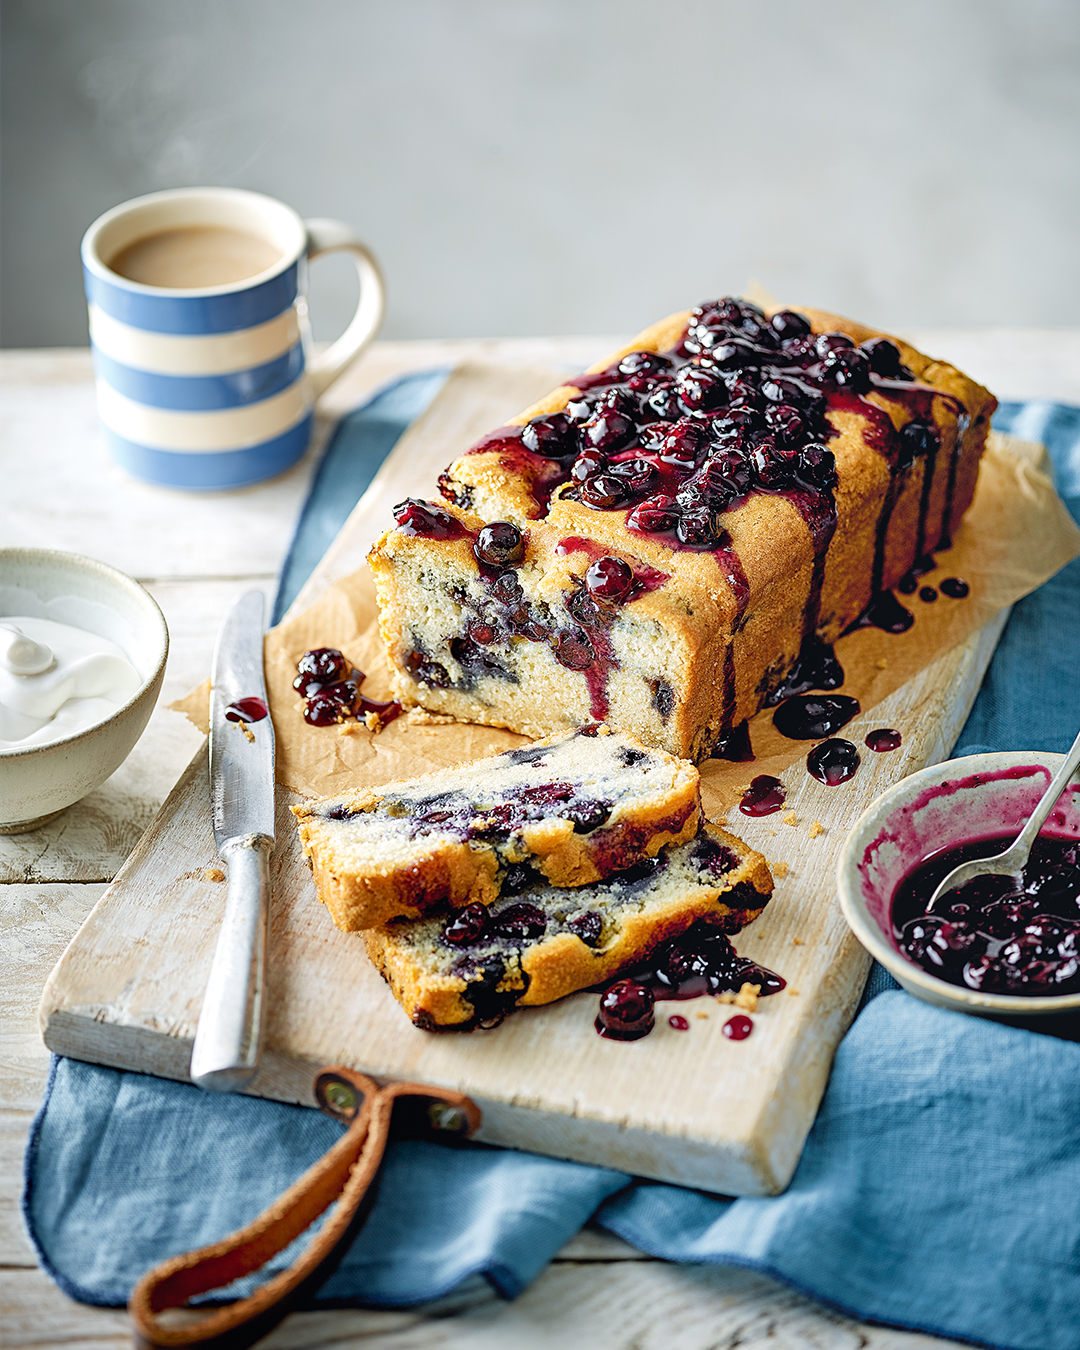 Ottolenghi's Blueberry, Almond and Lemon Loaf Cake Recipe